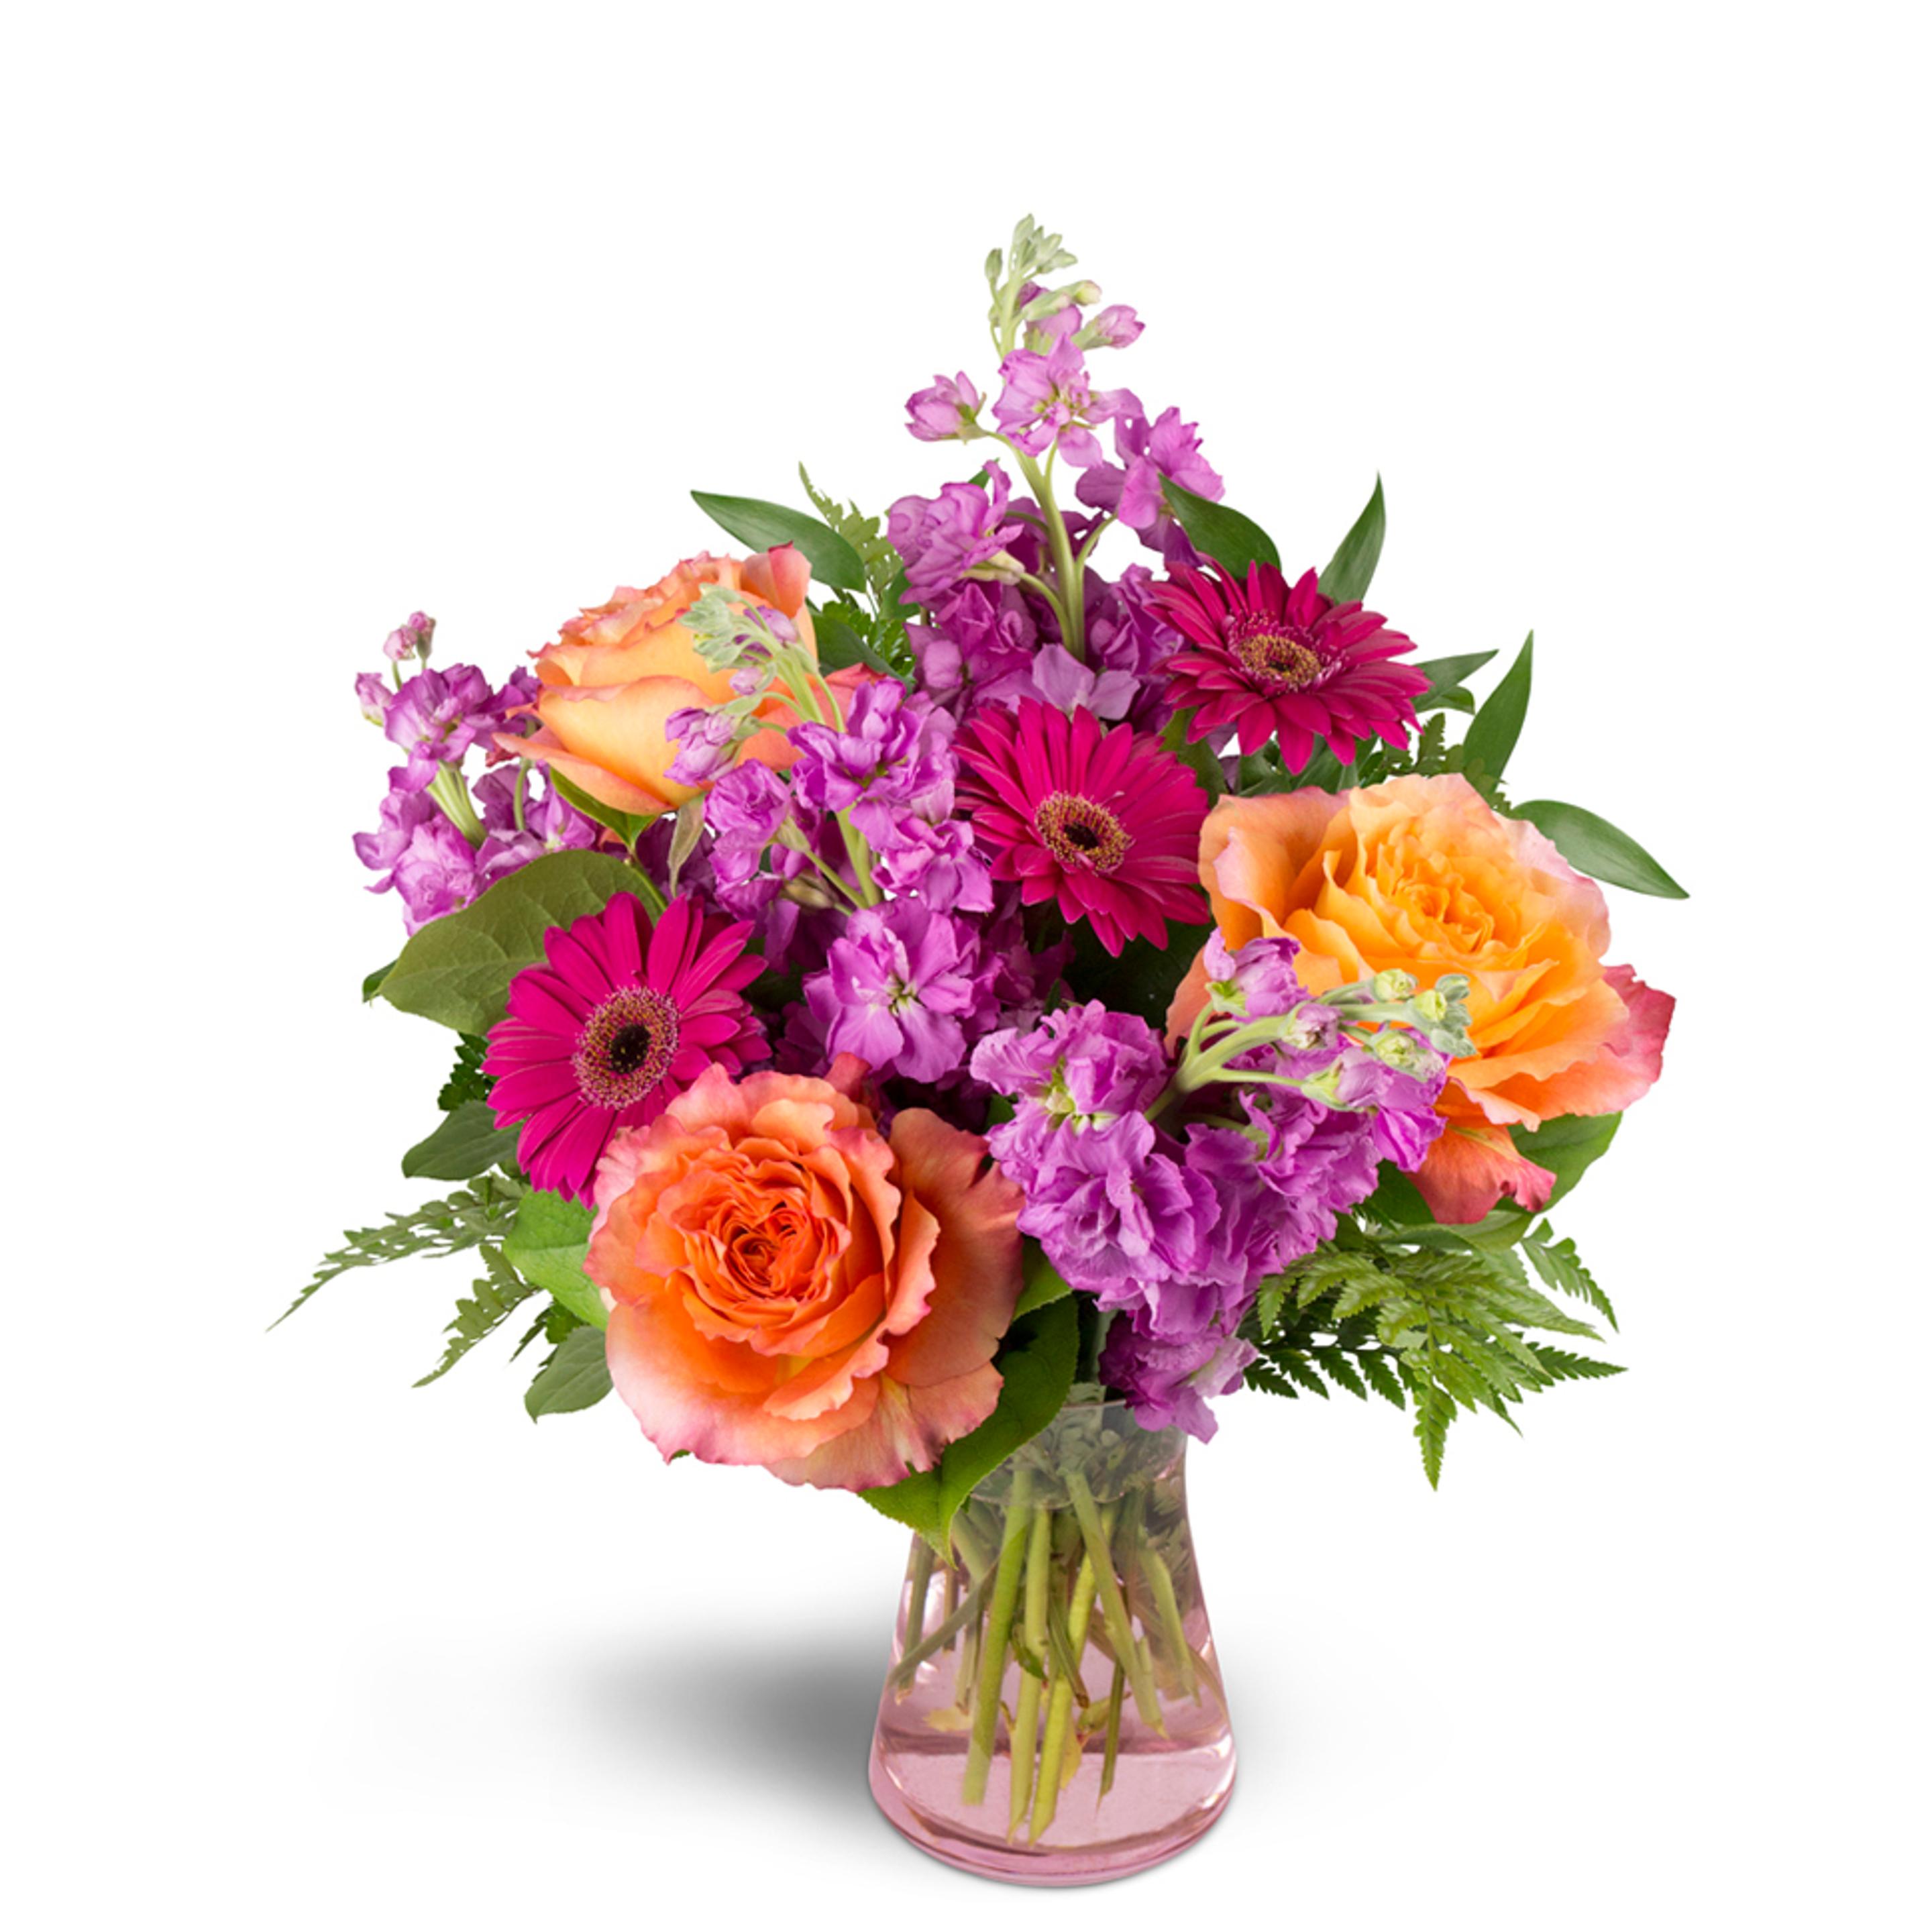 A bright arrangement with orange and pink perfect for celebrating a birthday.